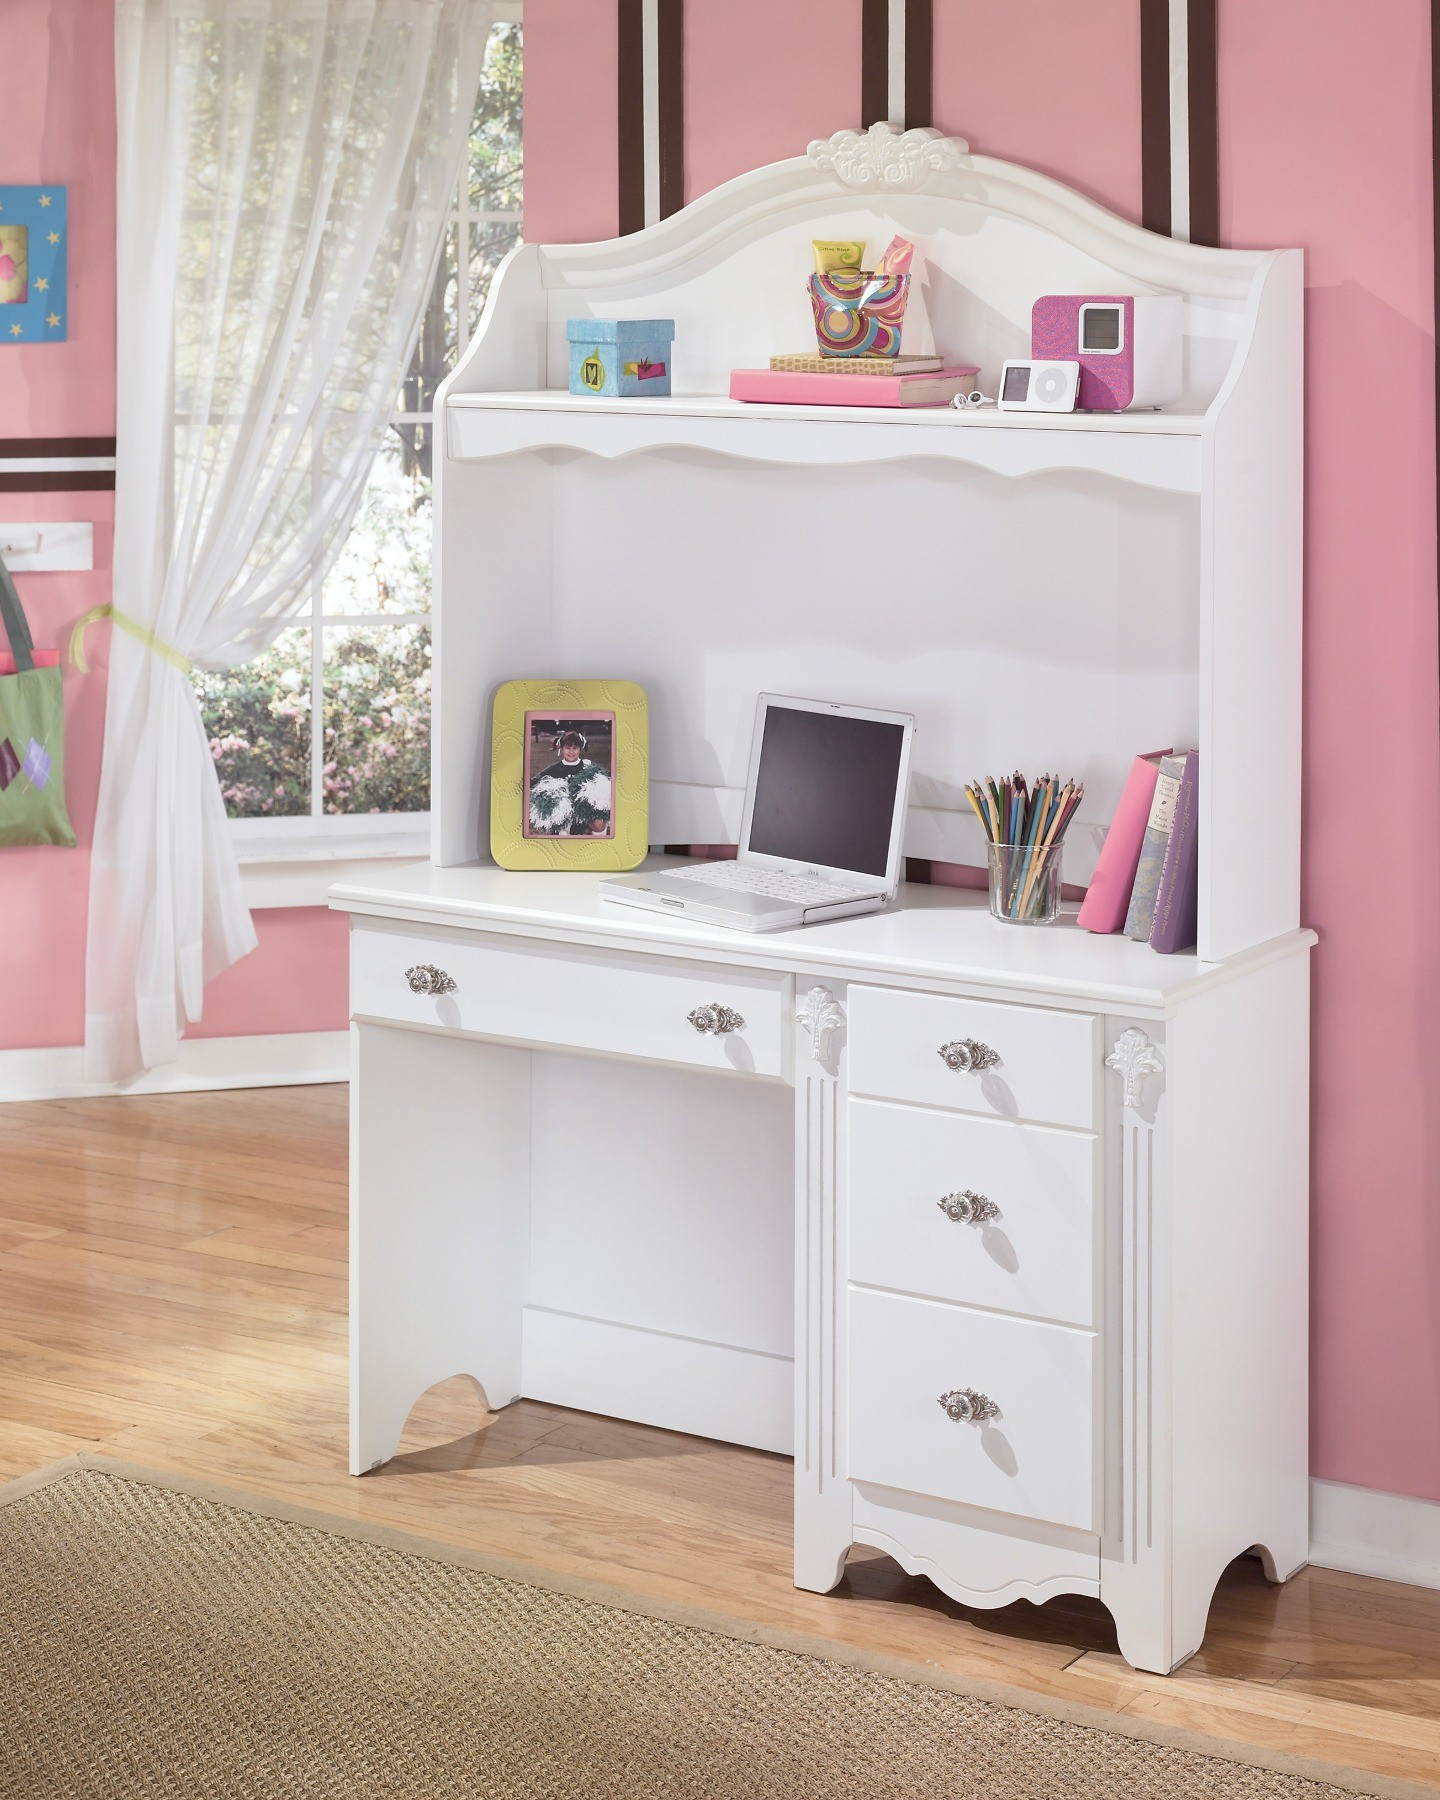 Girls Bedroom Desk
 Exquisite Bedroom Desk With Hutch from Ashley B188 22 23